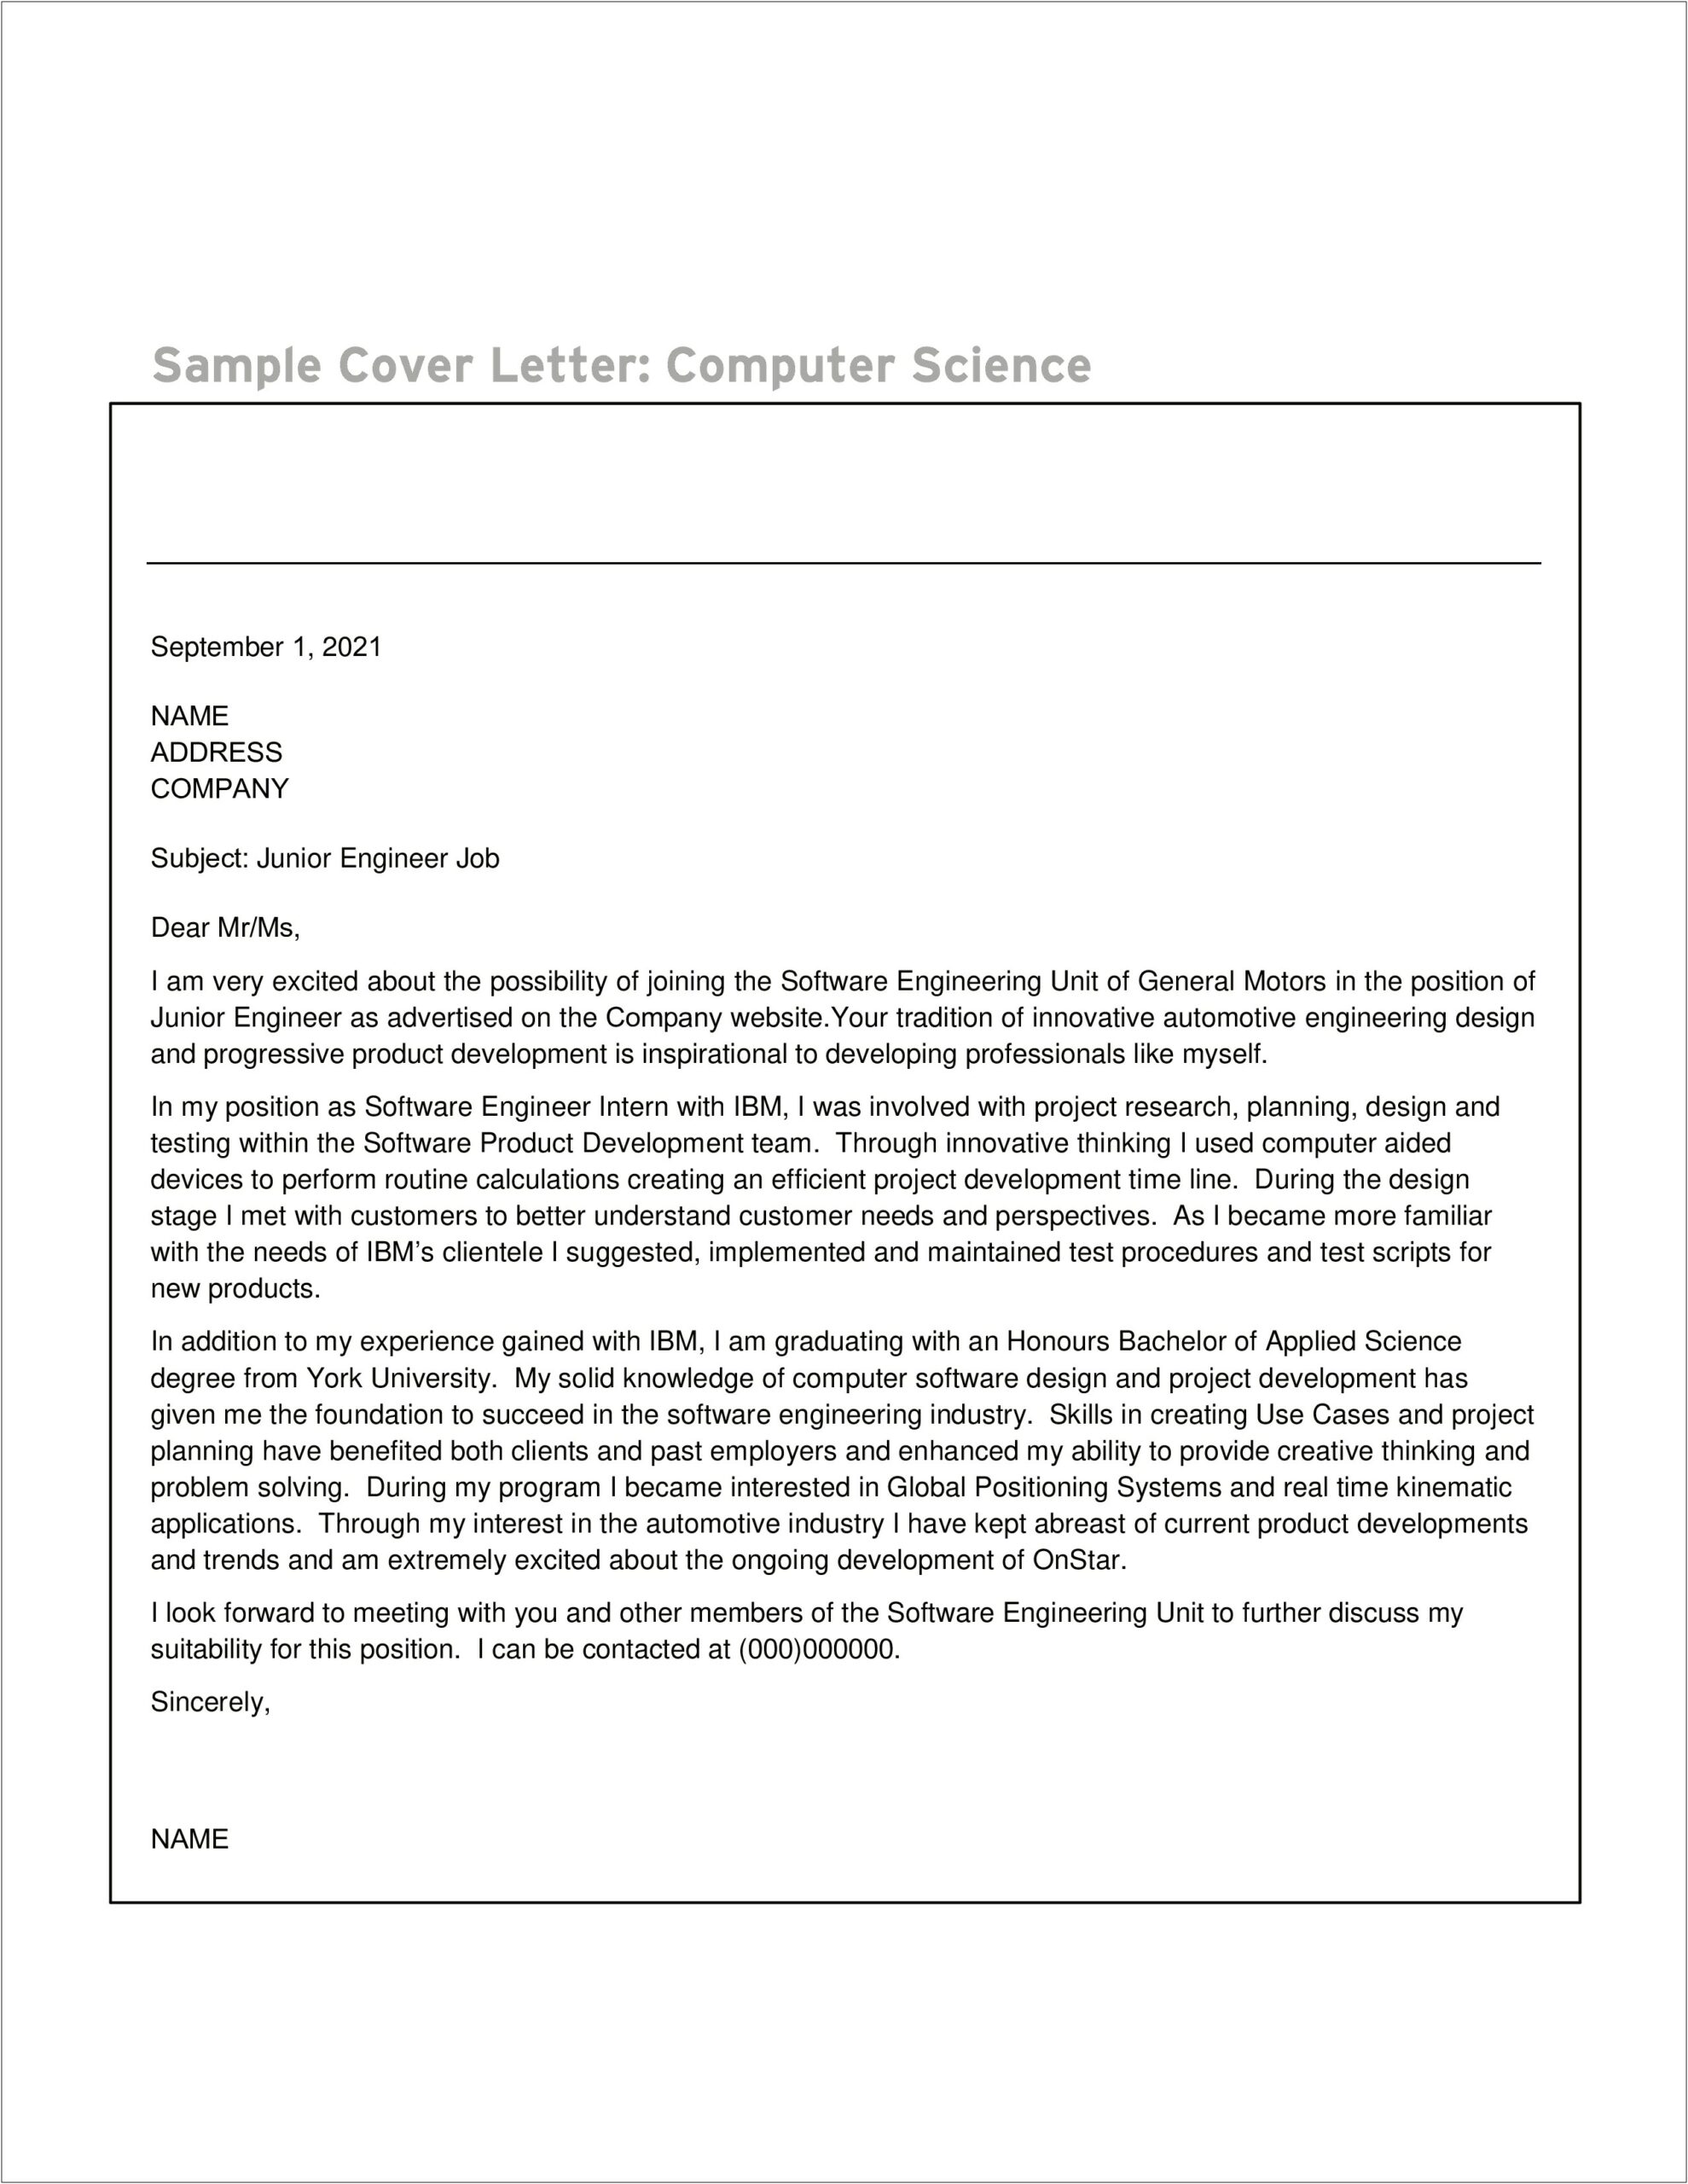 Computer Science Resume Cover Letter Template